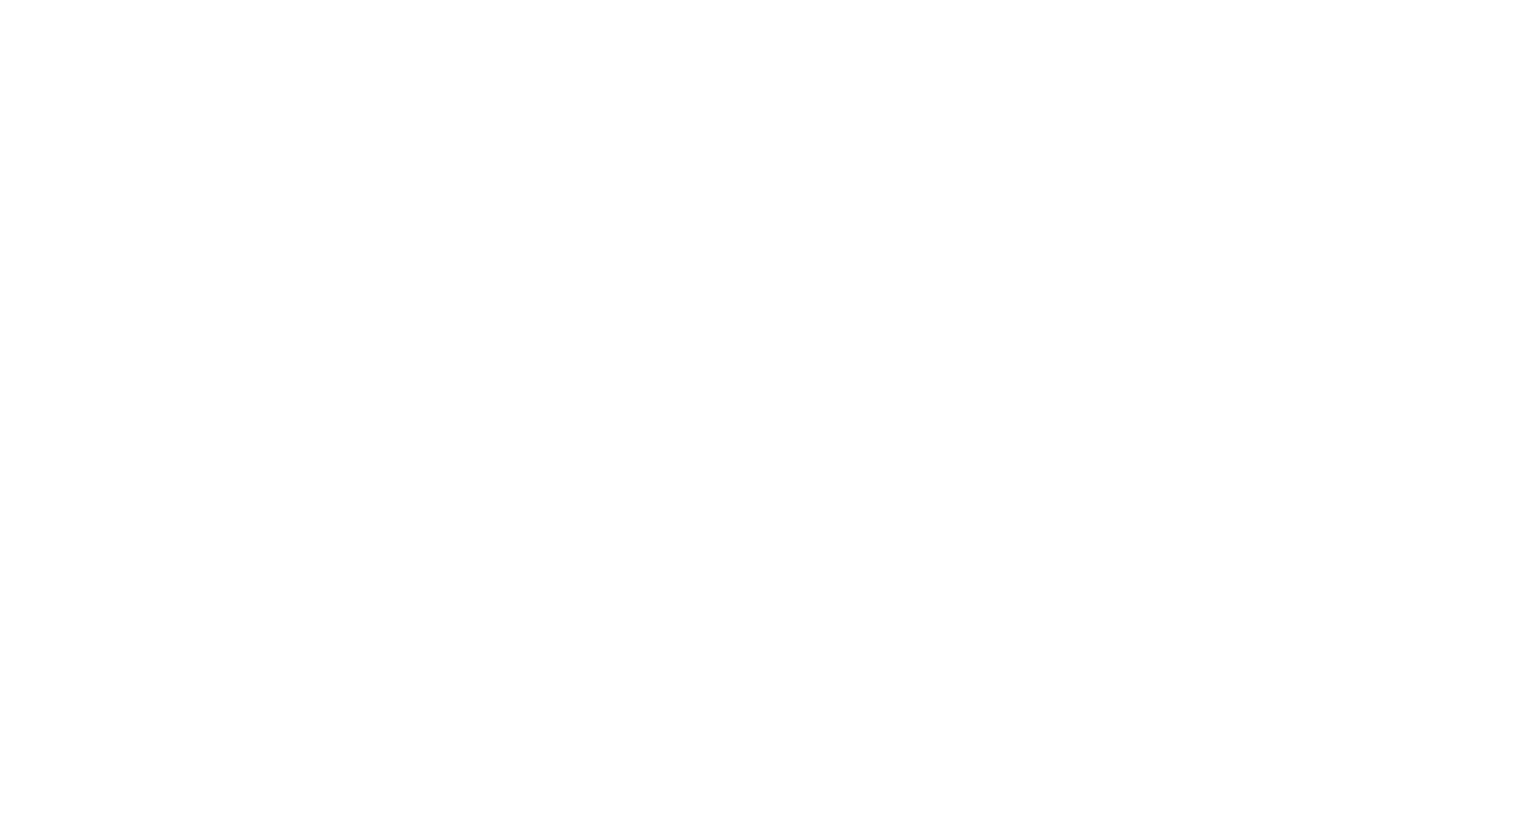 Parallel Markets